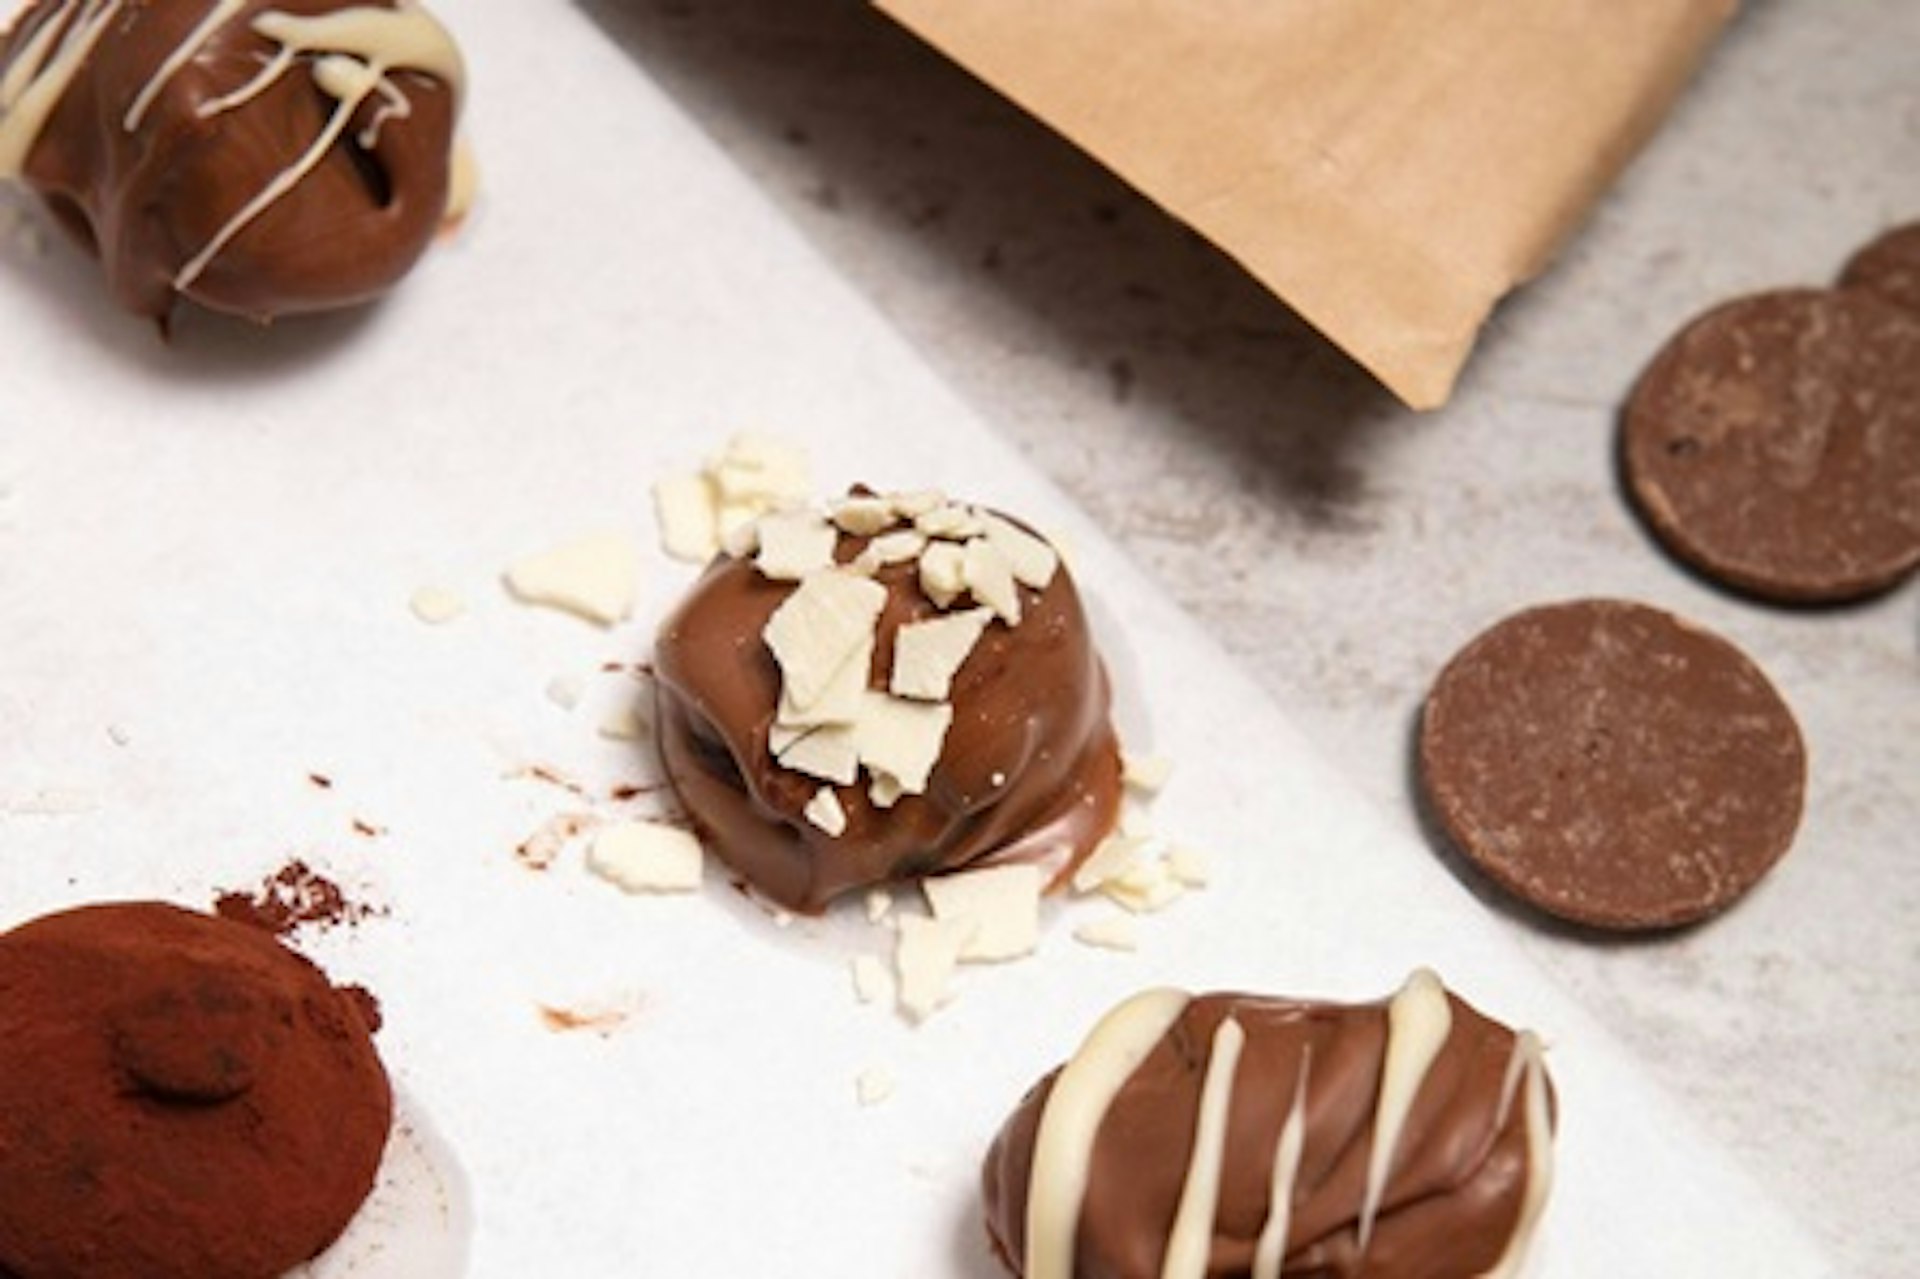 Live Online Chocolate Truffle Making Experience with Kit for Two with My Chocolate